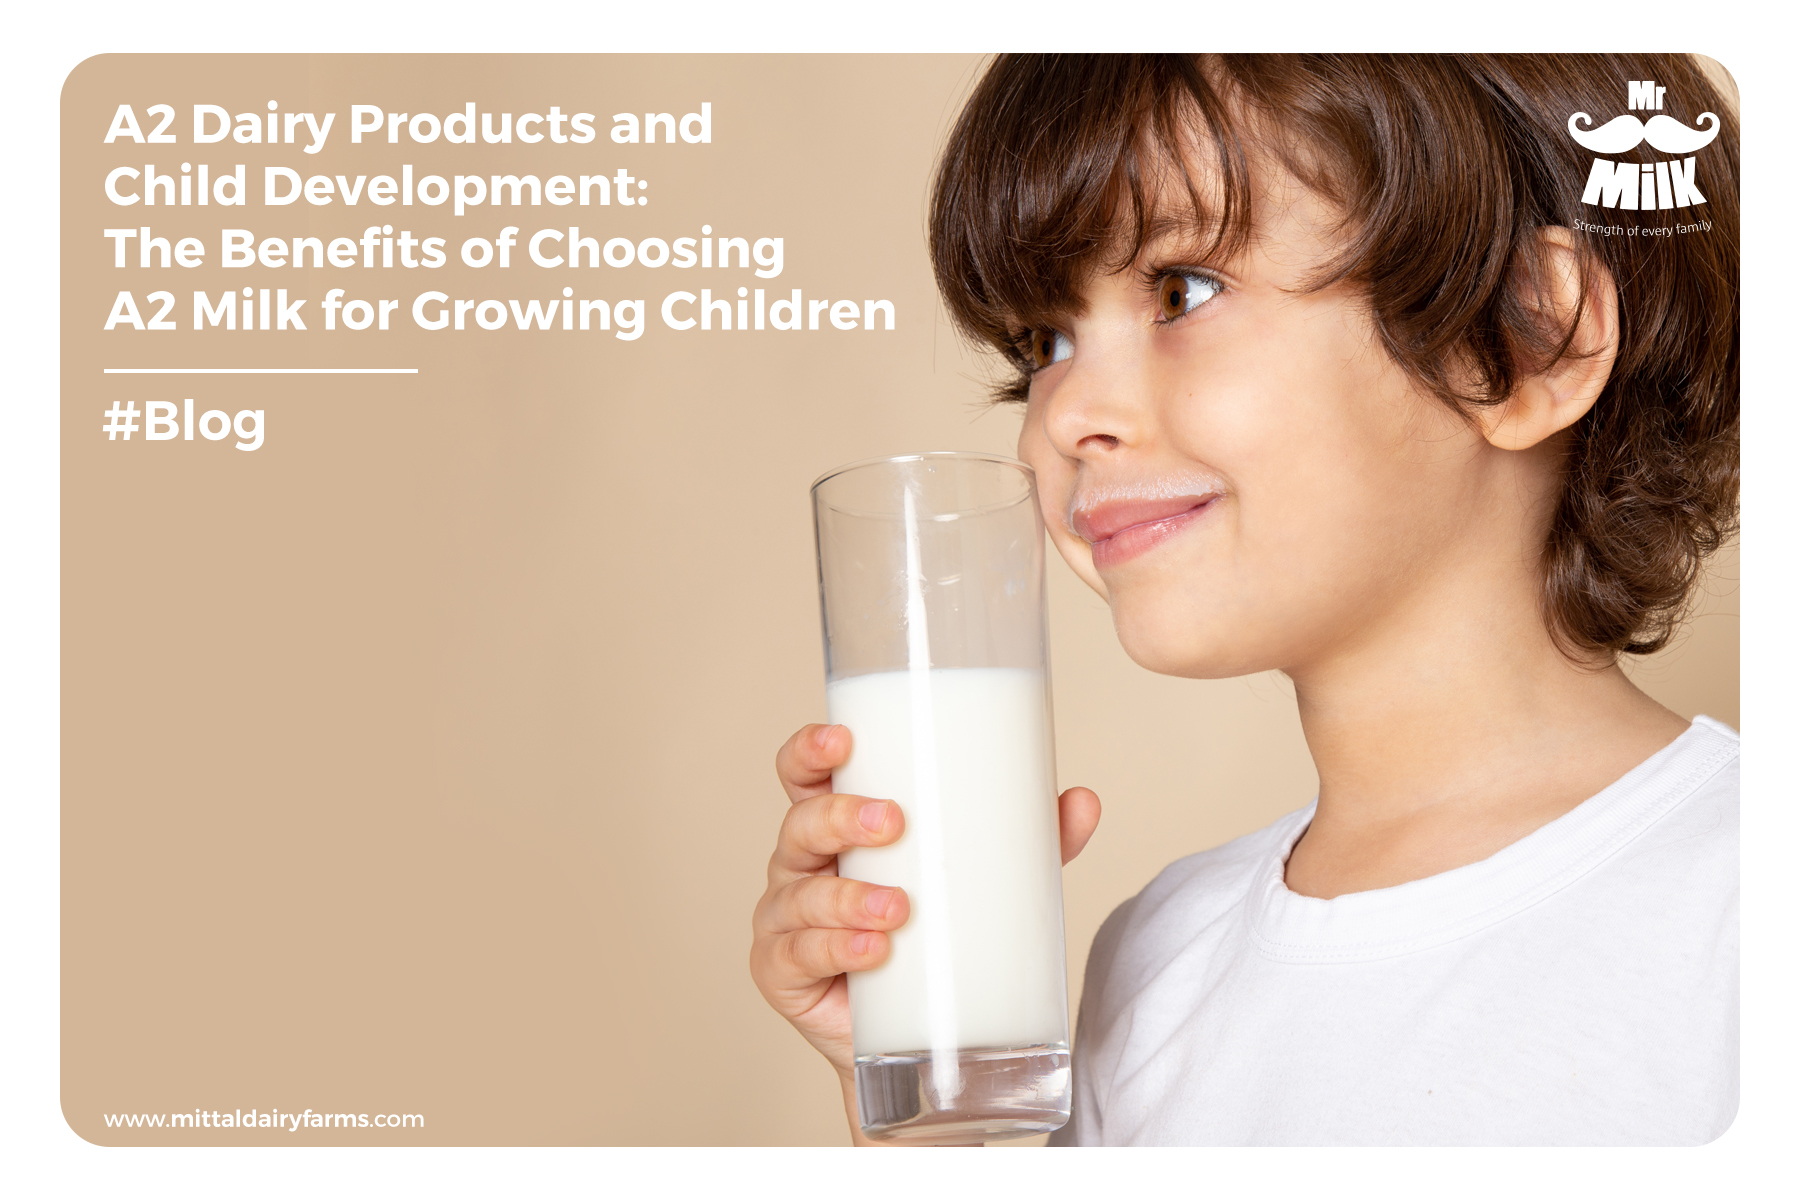 A2 Dairy Products and Child Development: The Benefits of Choosing Mr Milk A2 Milk Brand for Growing Children.